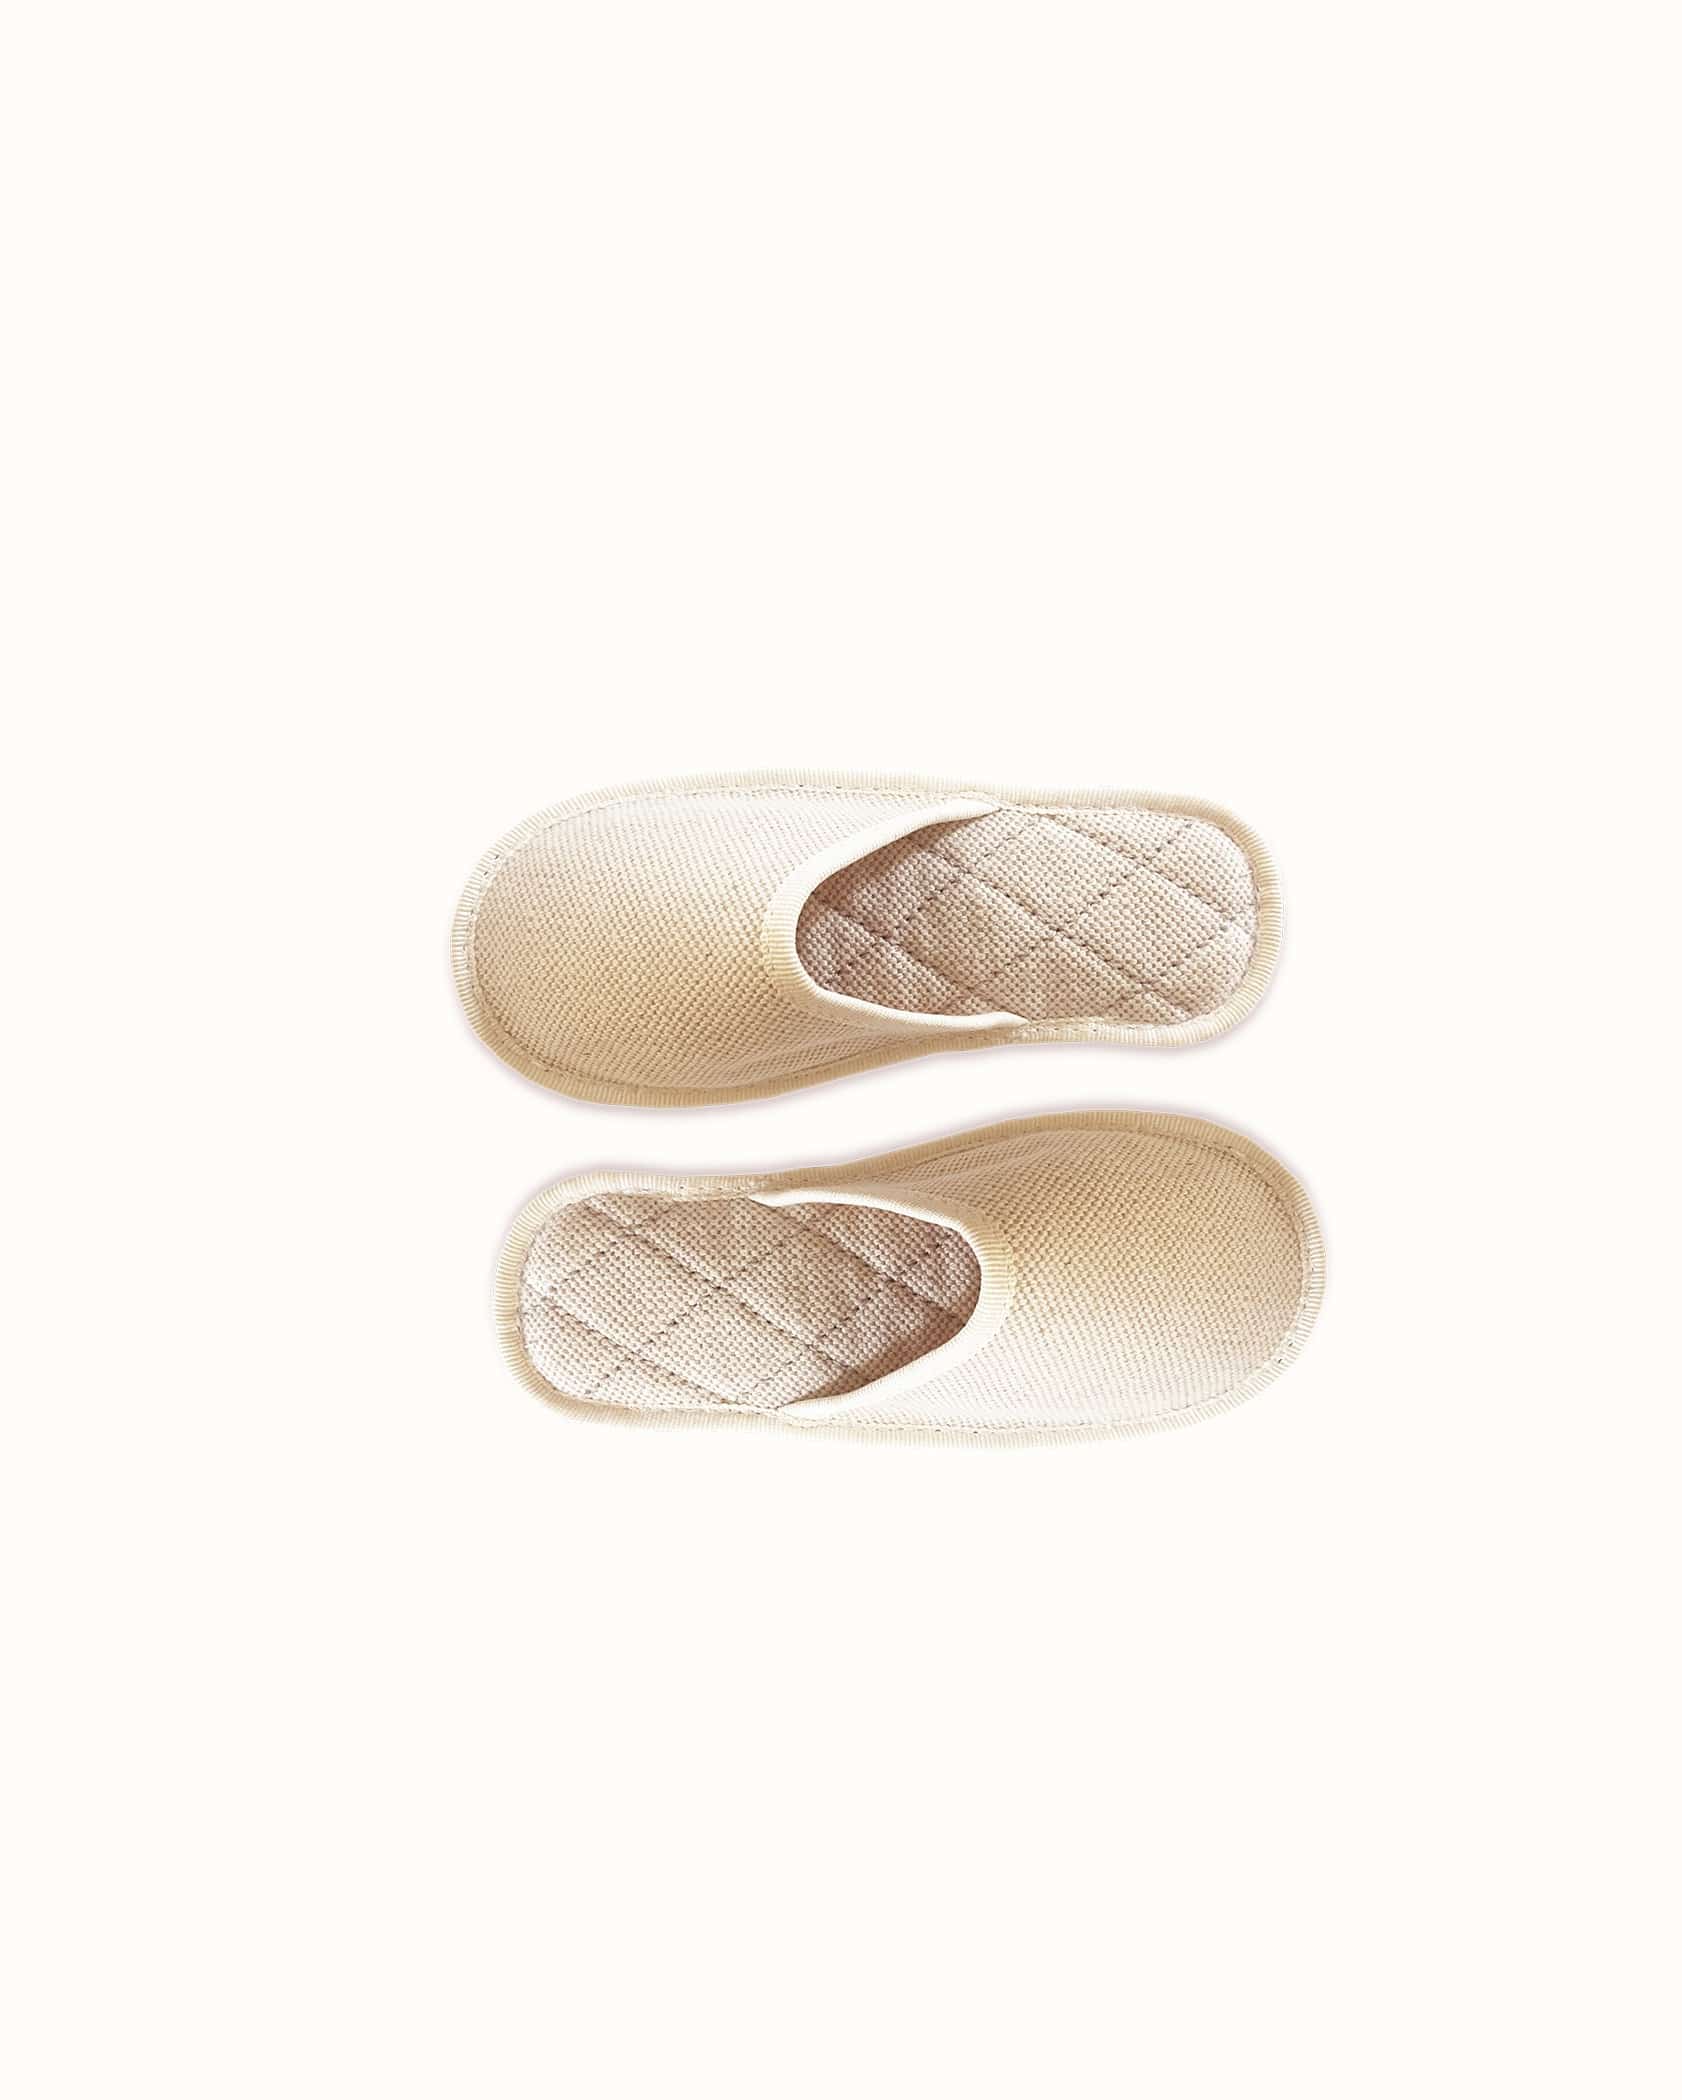 French slippers for kids. Le Spleen "Petite Flamme", beige and white. A slip-on like hotel slippers with a quilted padding and an outstanding craftsmanship manufacturing. Made in France.